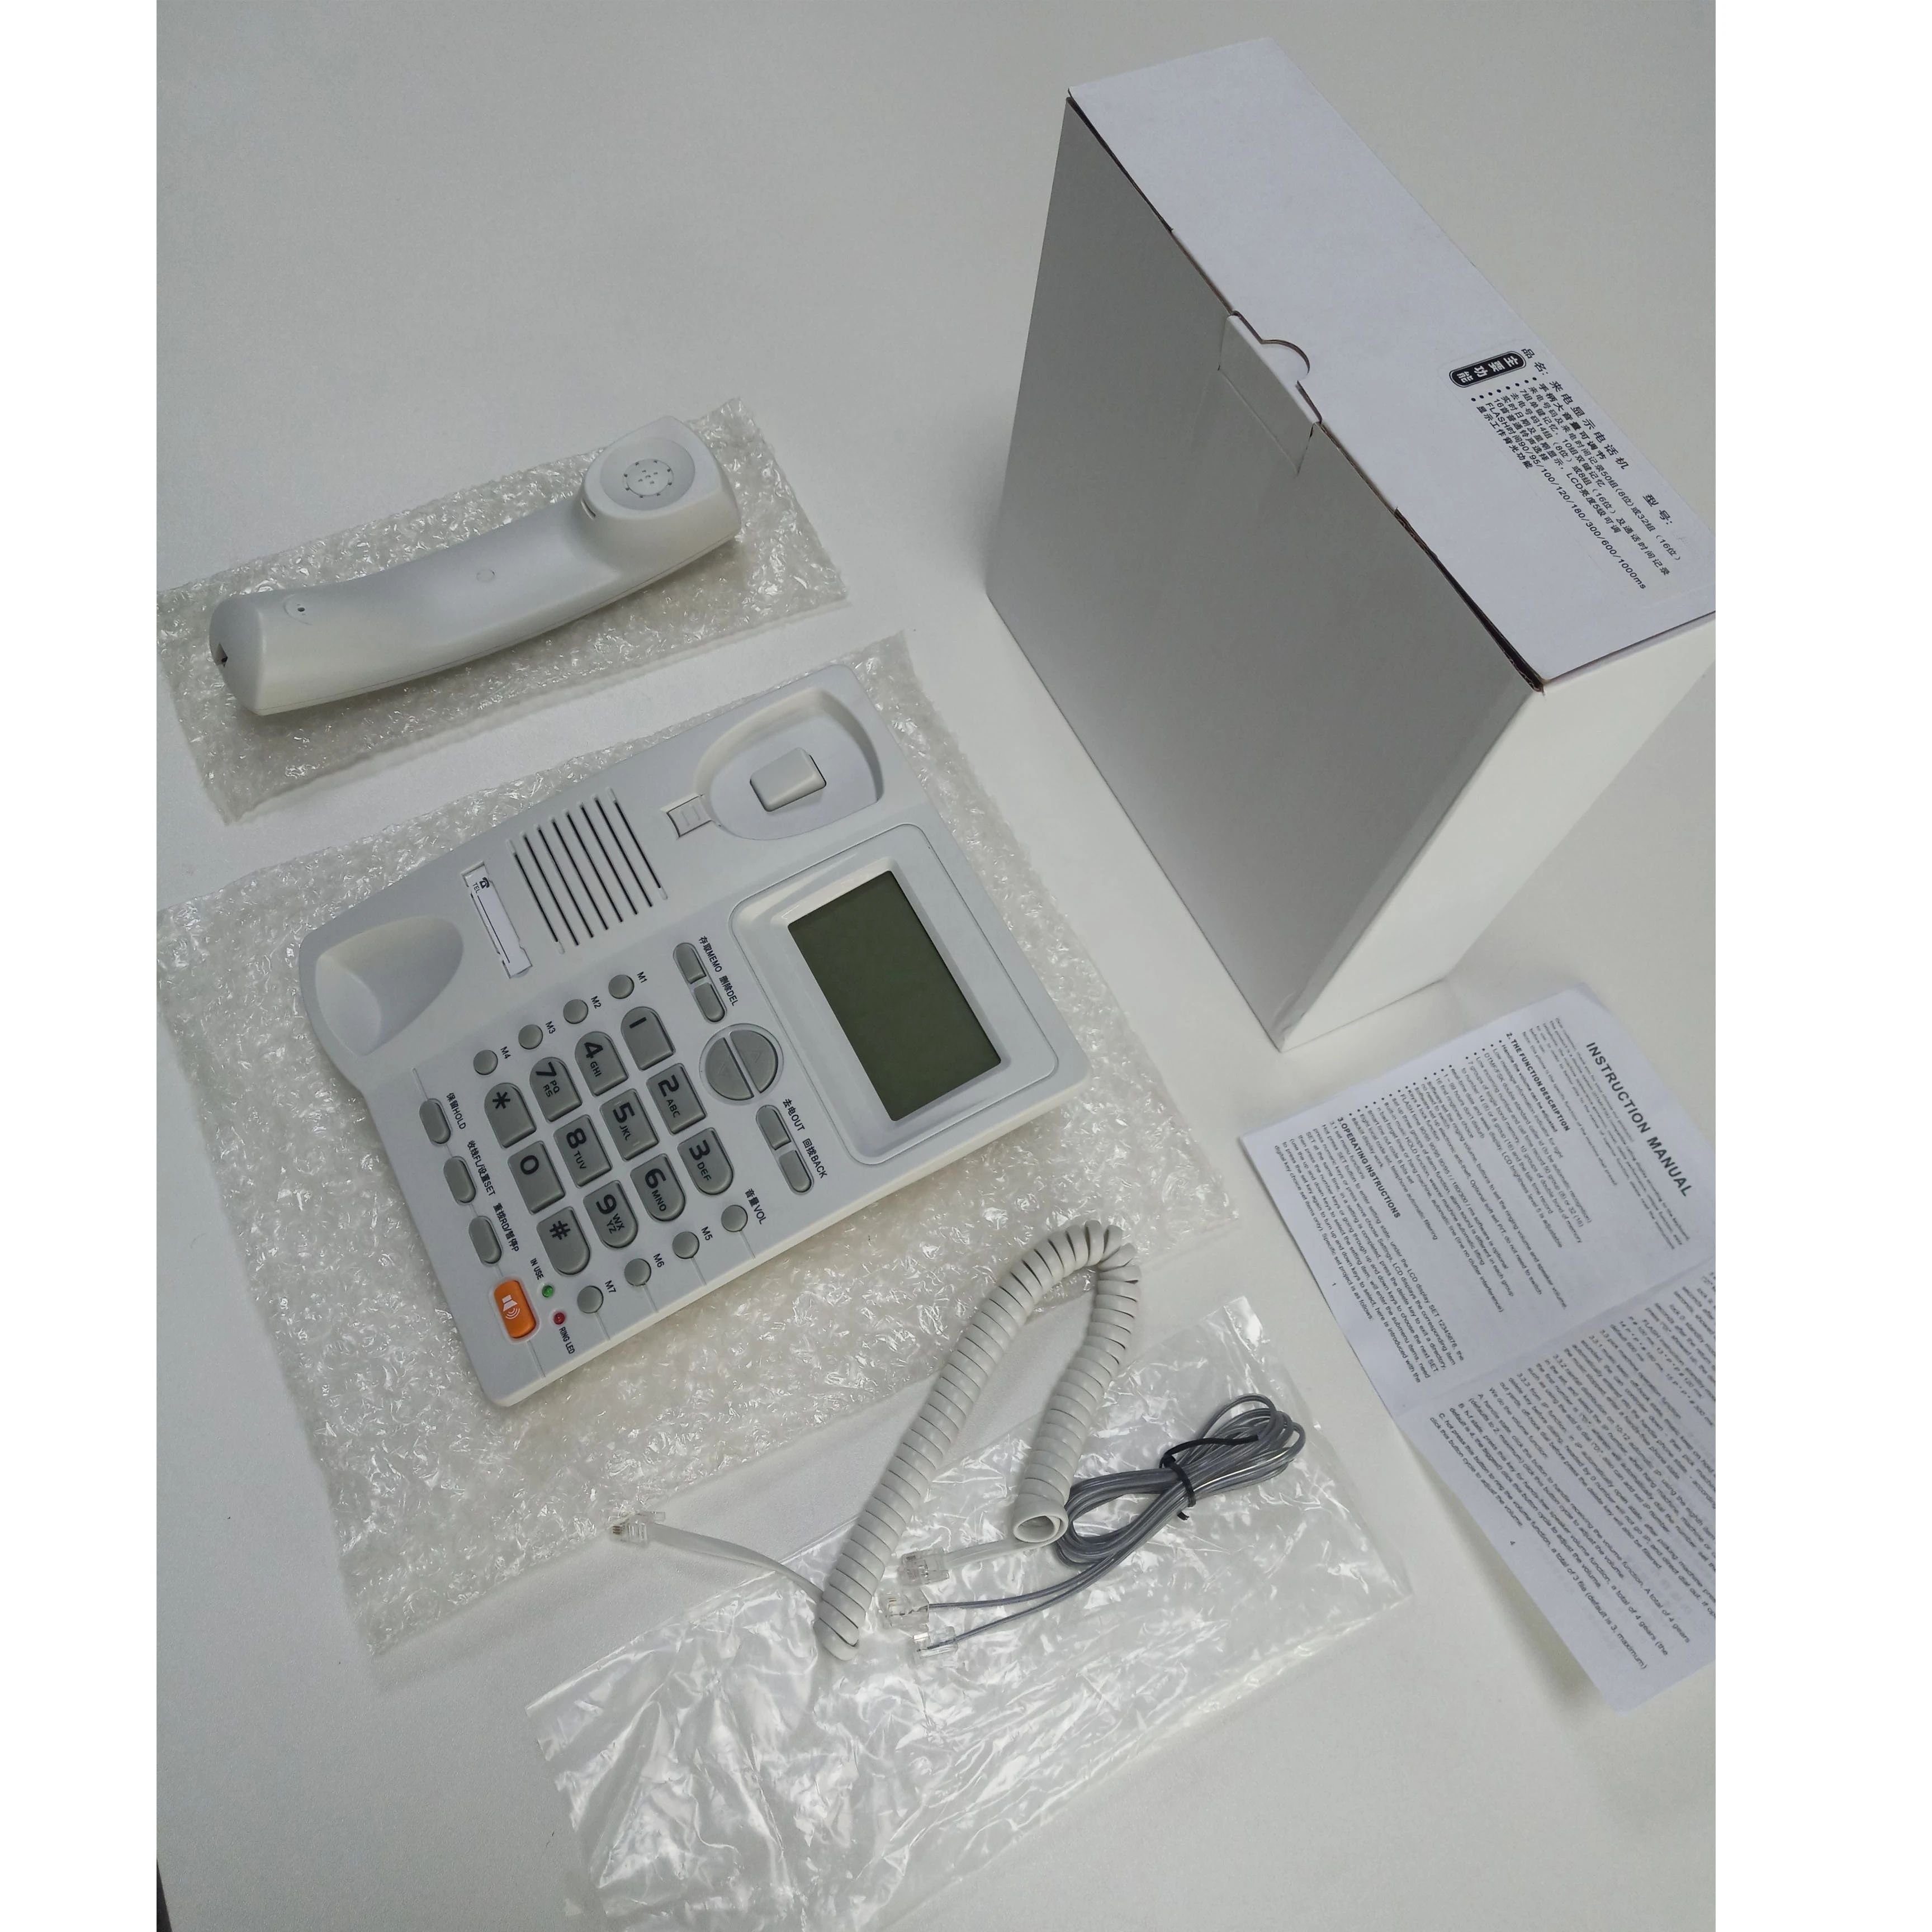 Stock New Quality Landline Analog Caller ID Corded Telephone within 24 working hours delivery